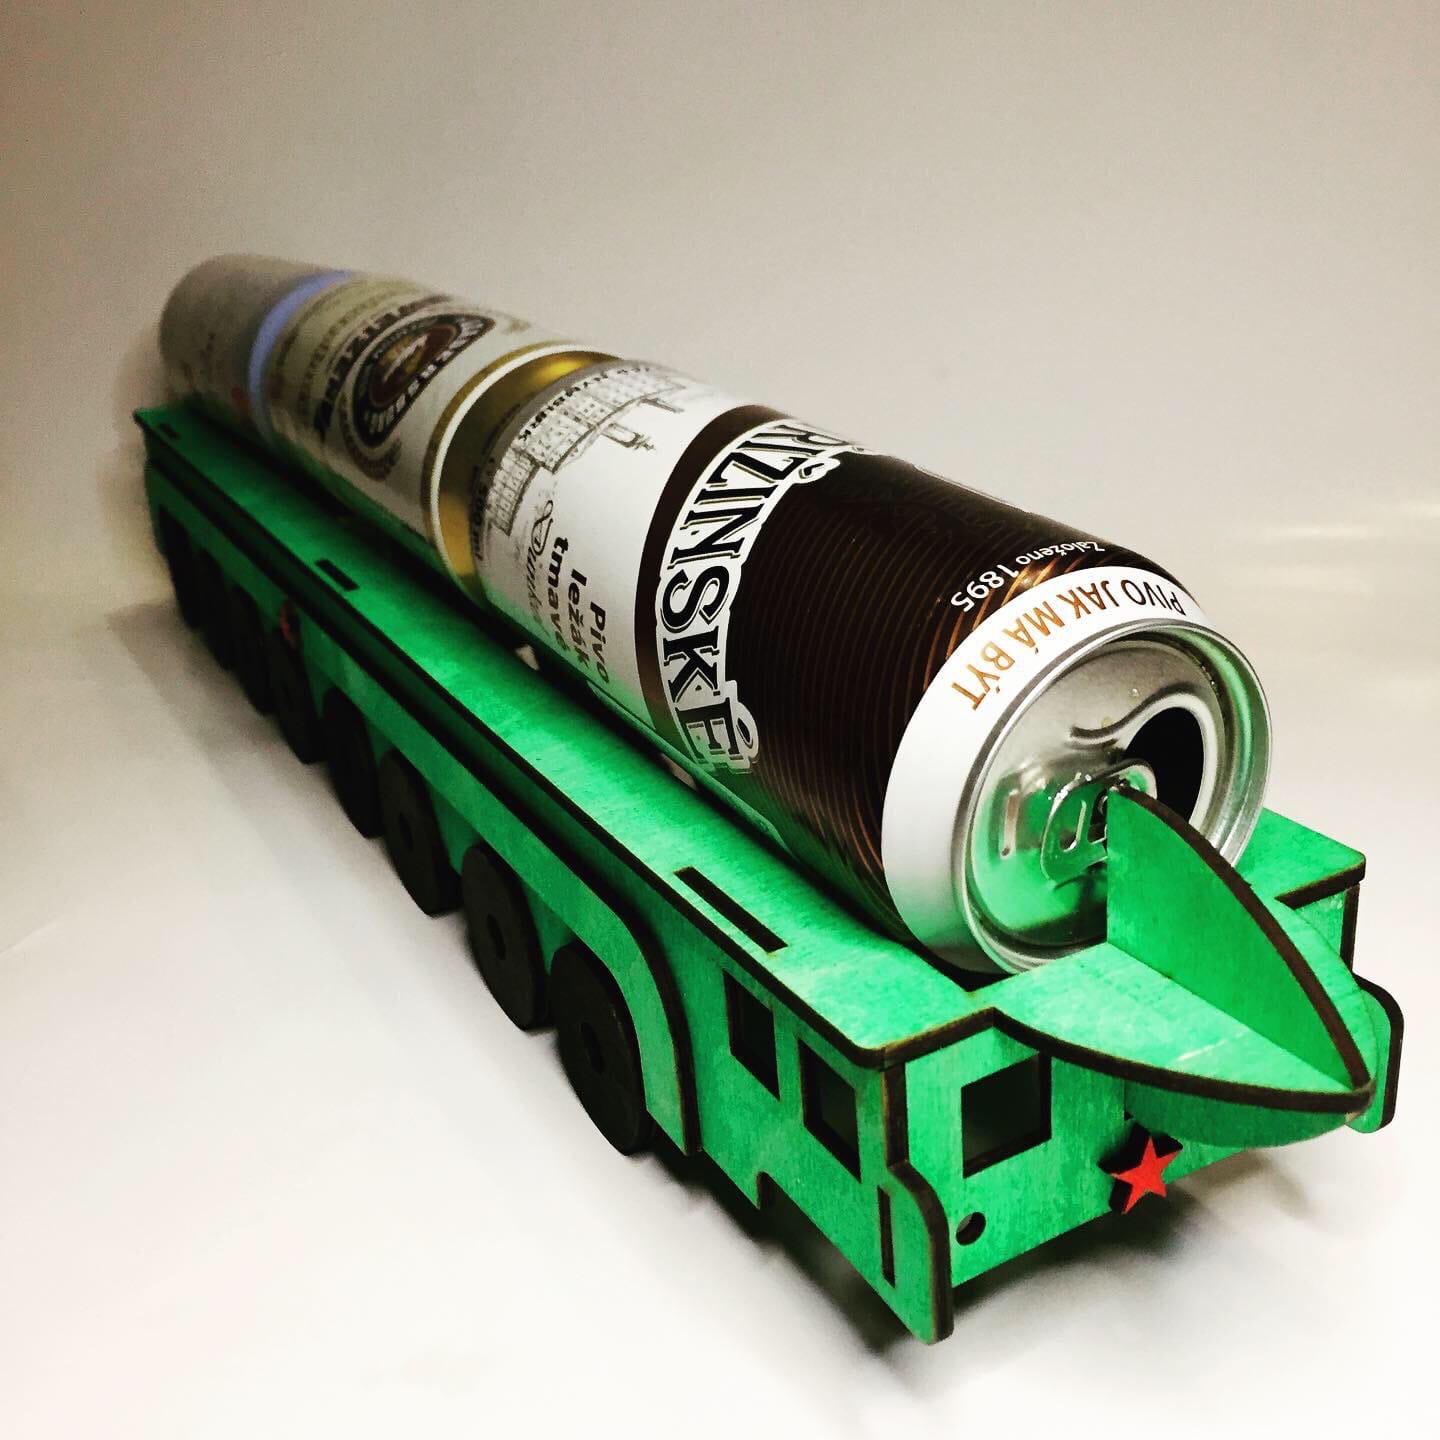 Laser Cut Beer Can Holder Ballistic Missile RT-2PM2 Topol-M Shaped Free Vector